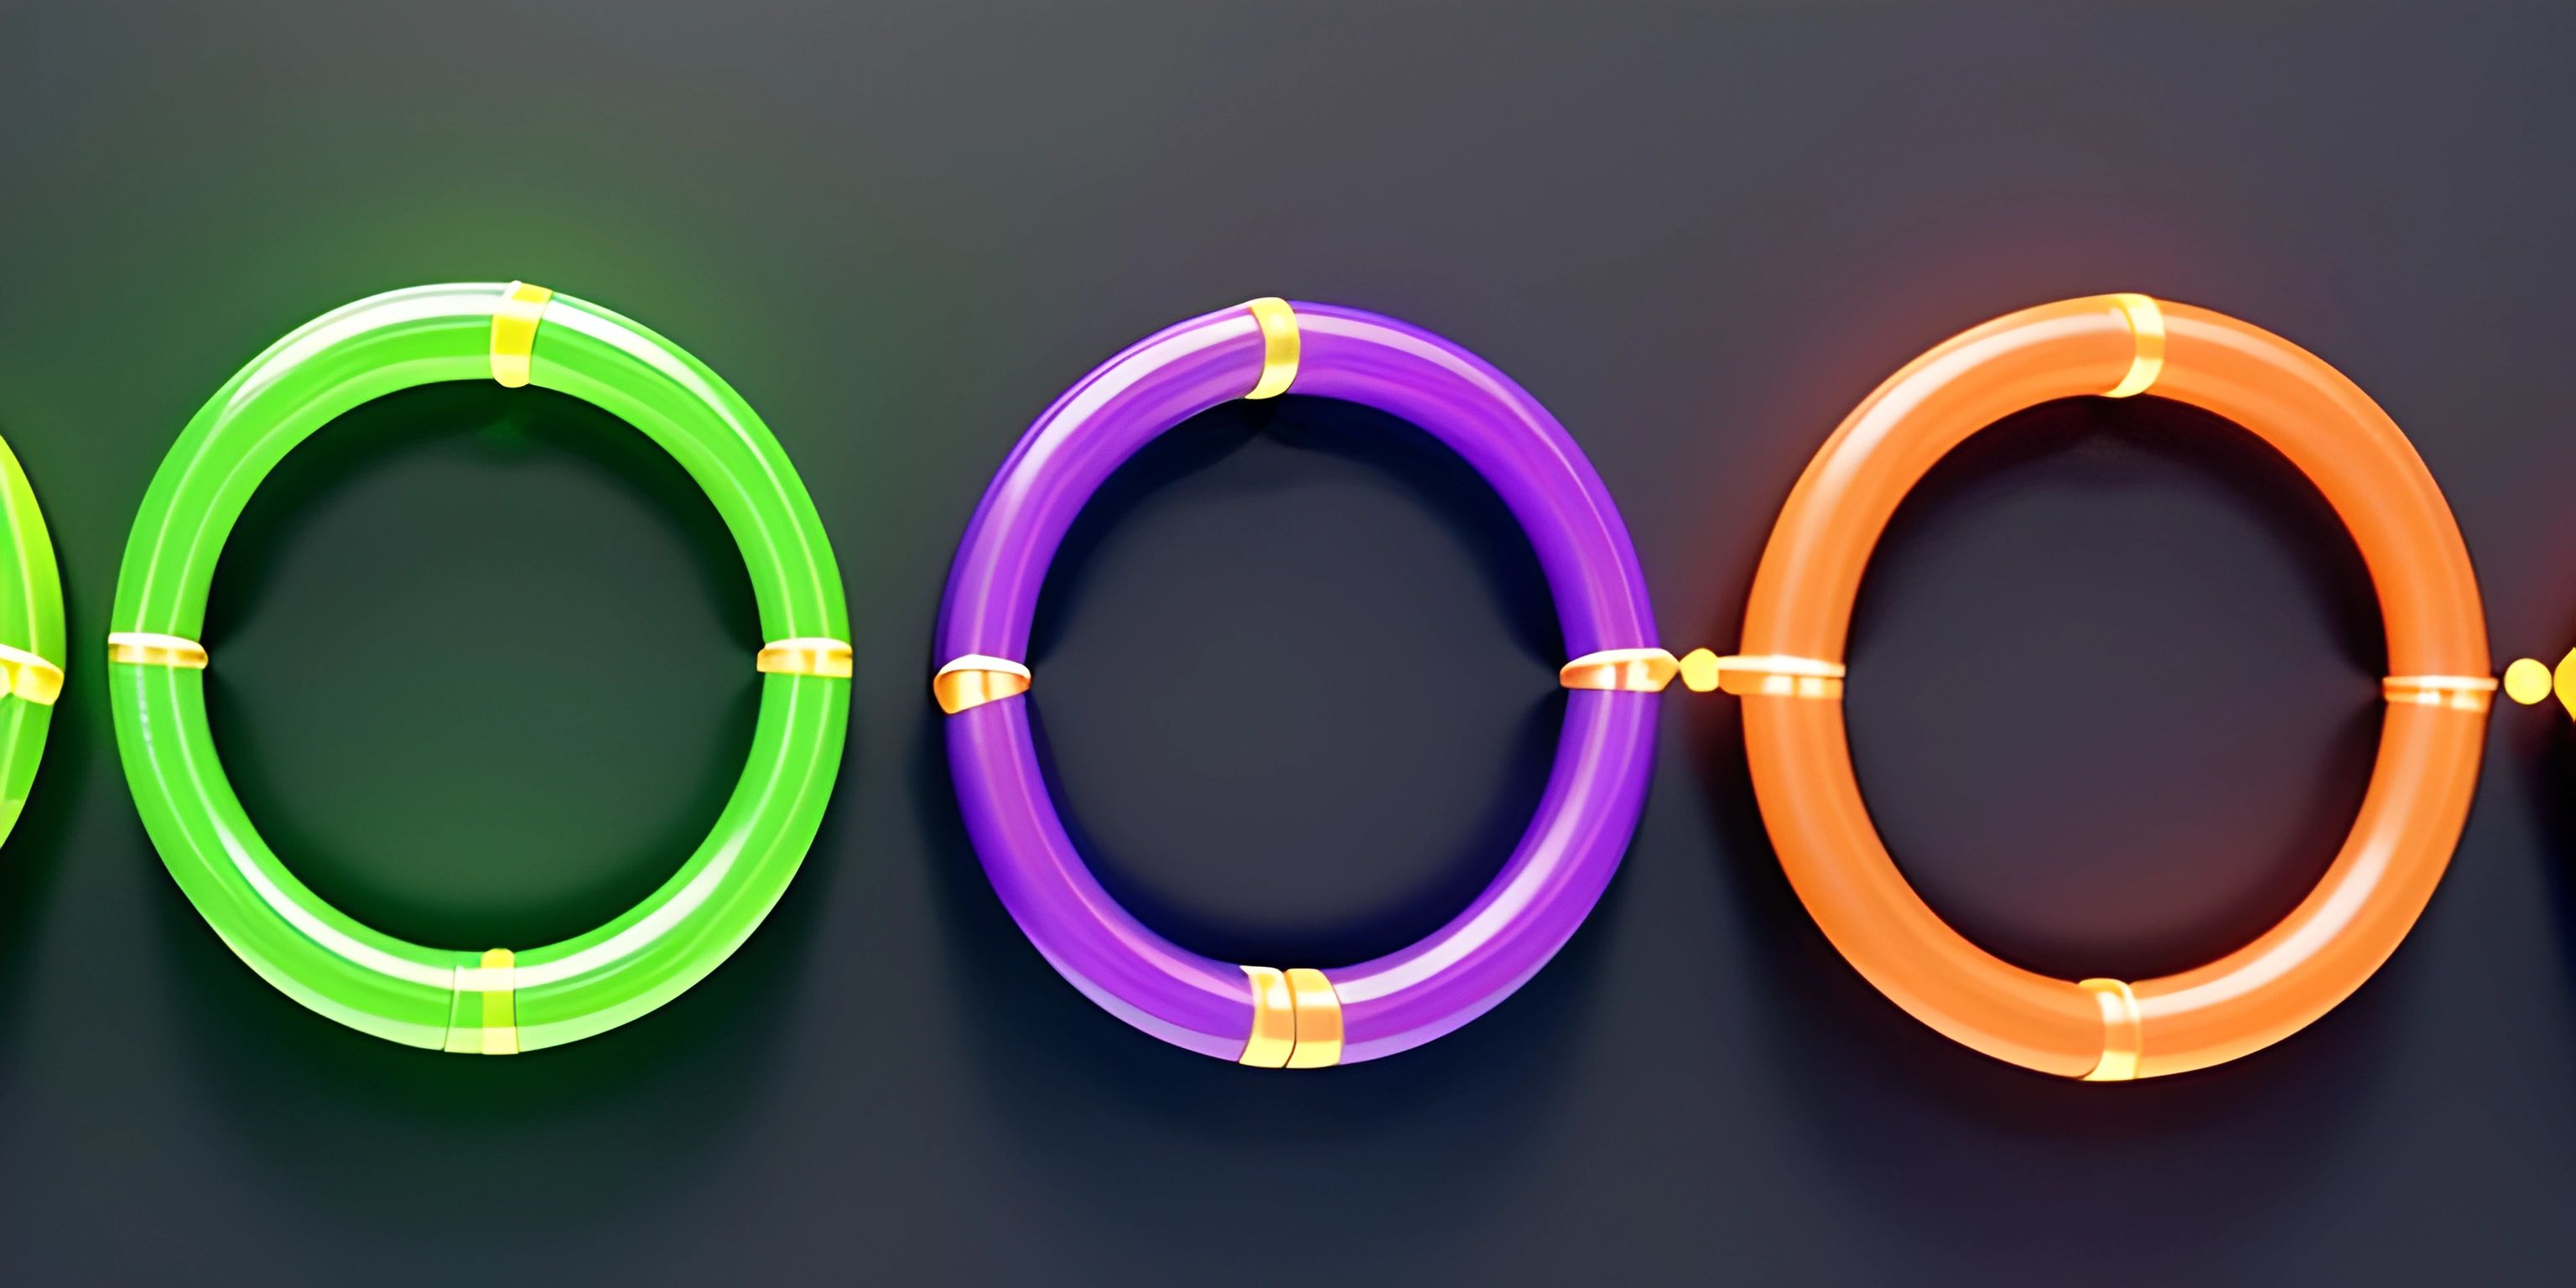 three ring shaped rings connected by a cord and yellow rope with a green, orange, and purple cord